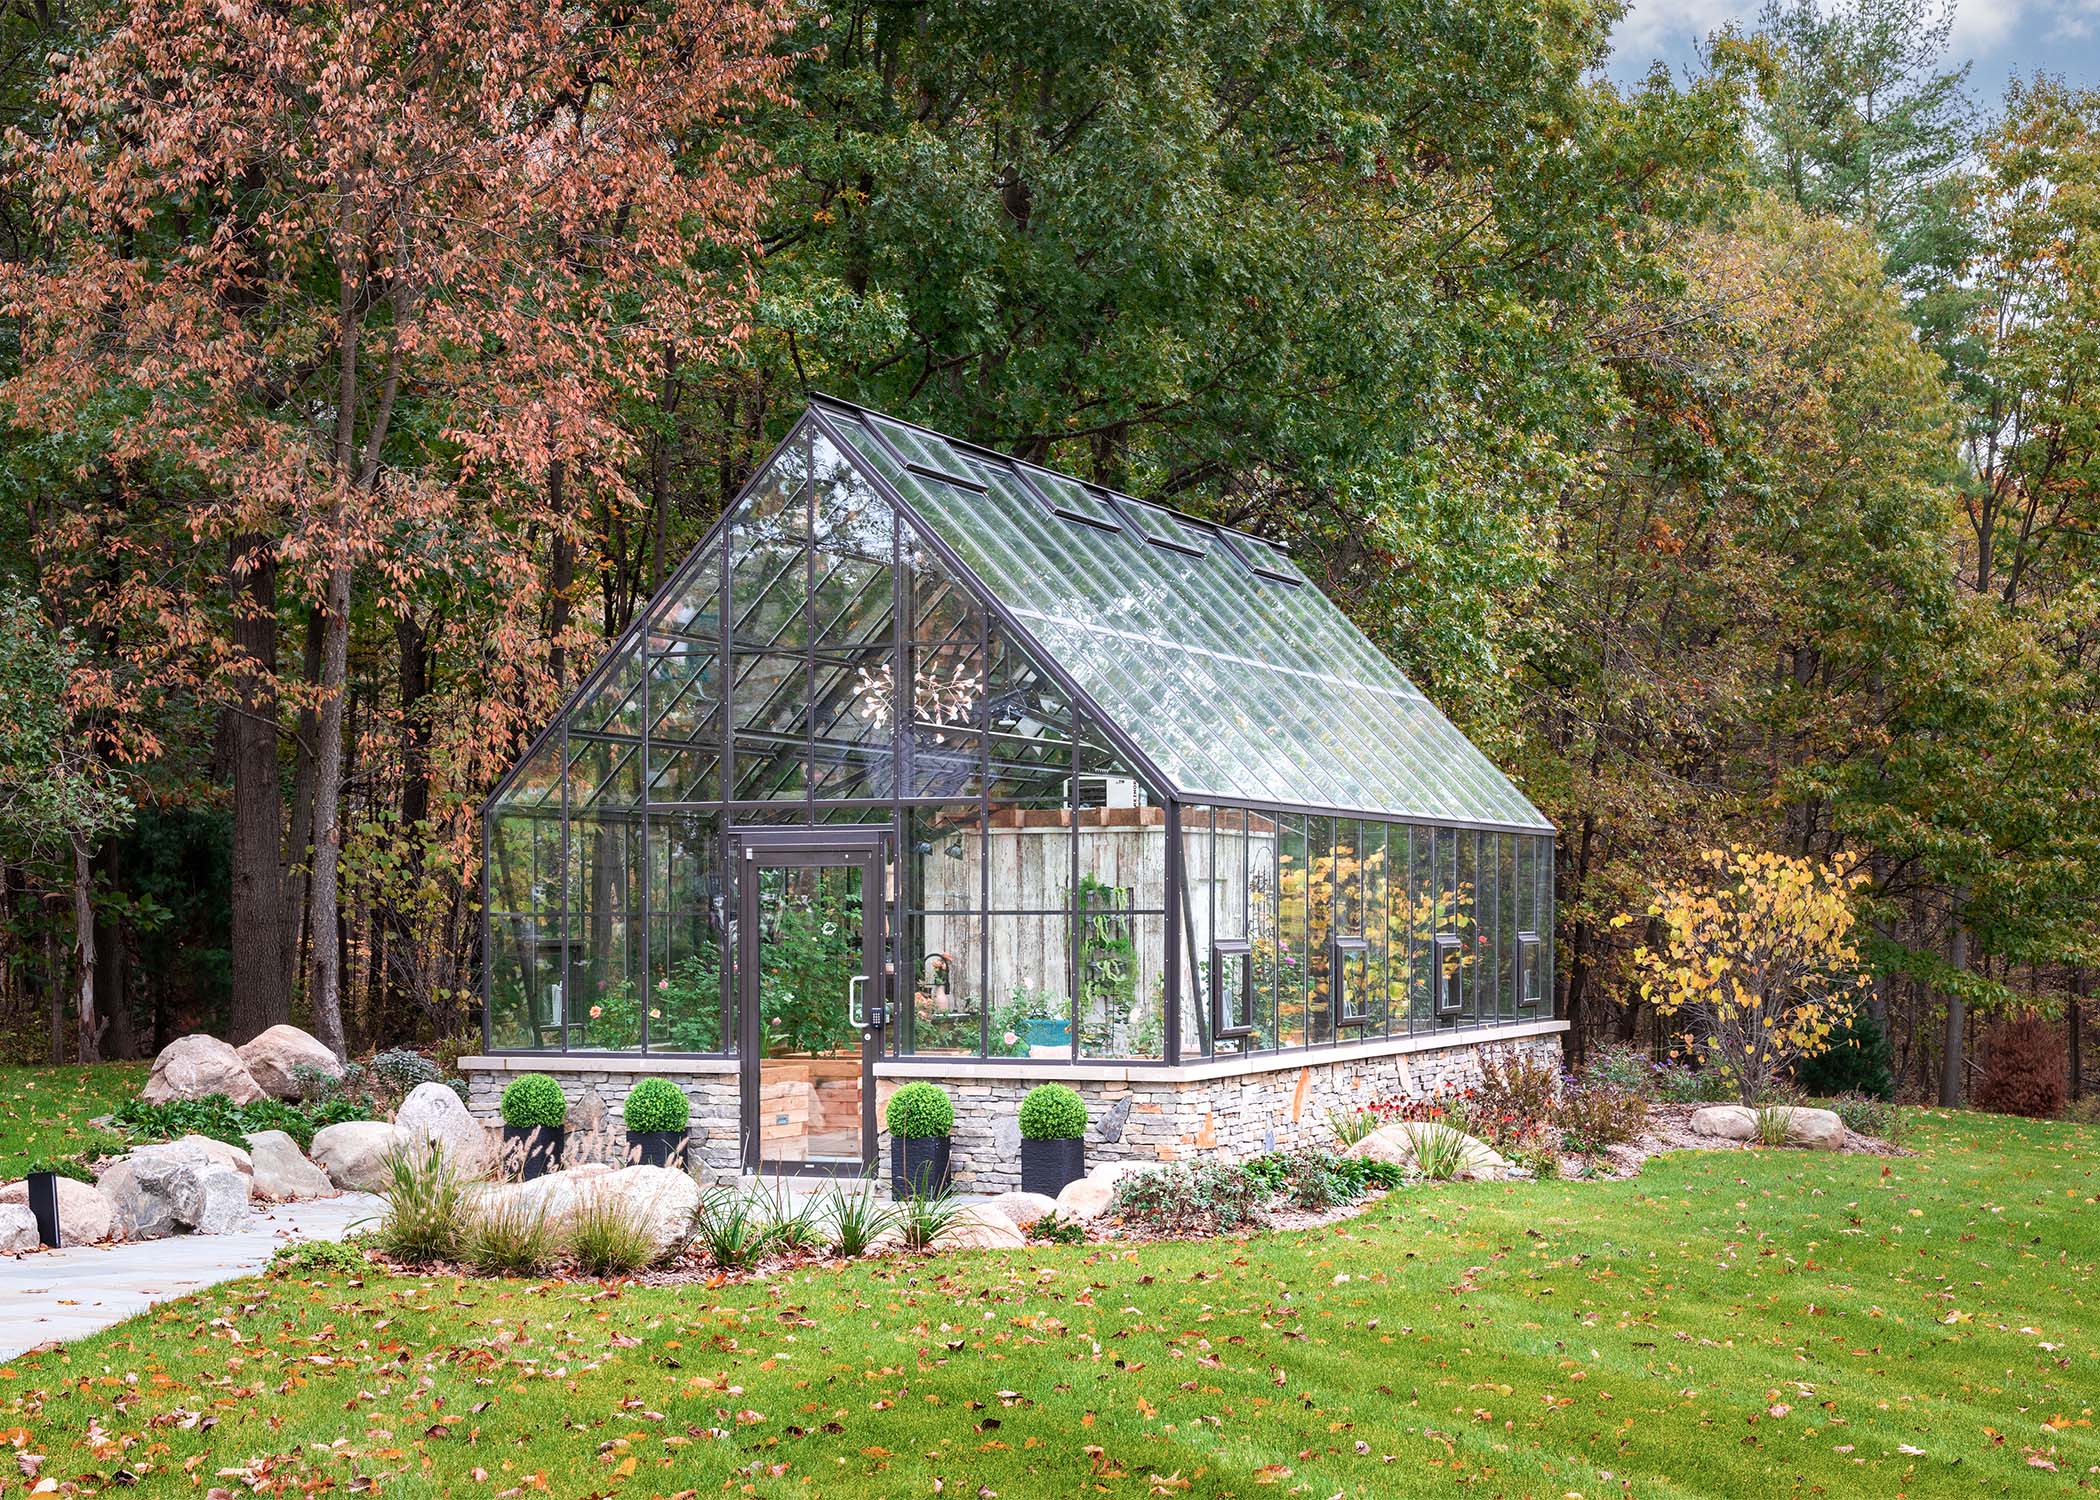 Life’s Good in the Woods – Greenhouse